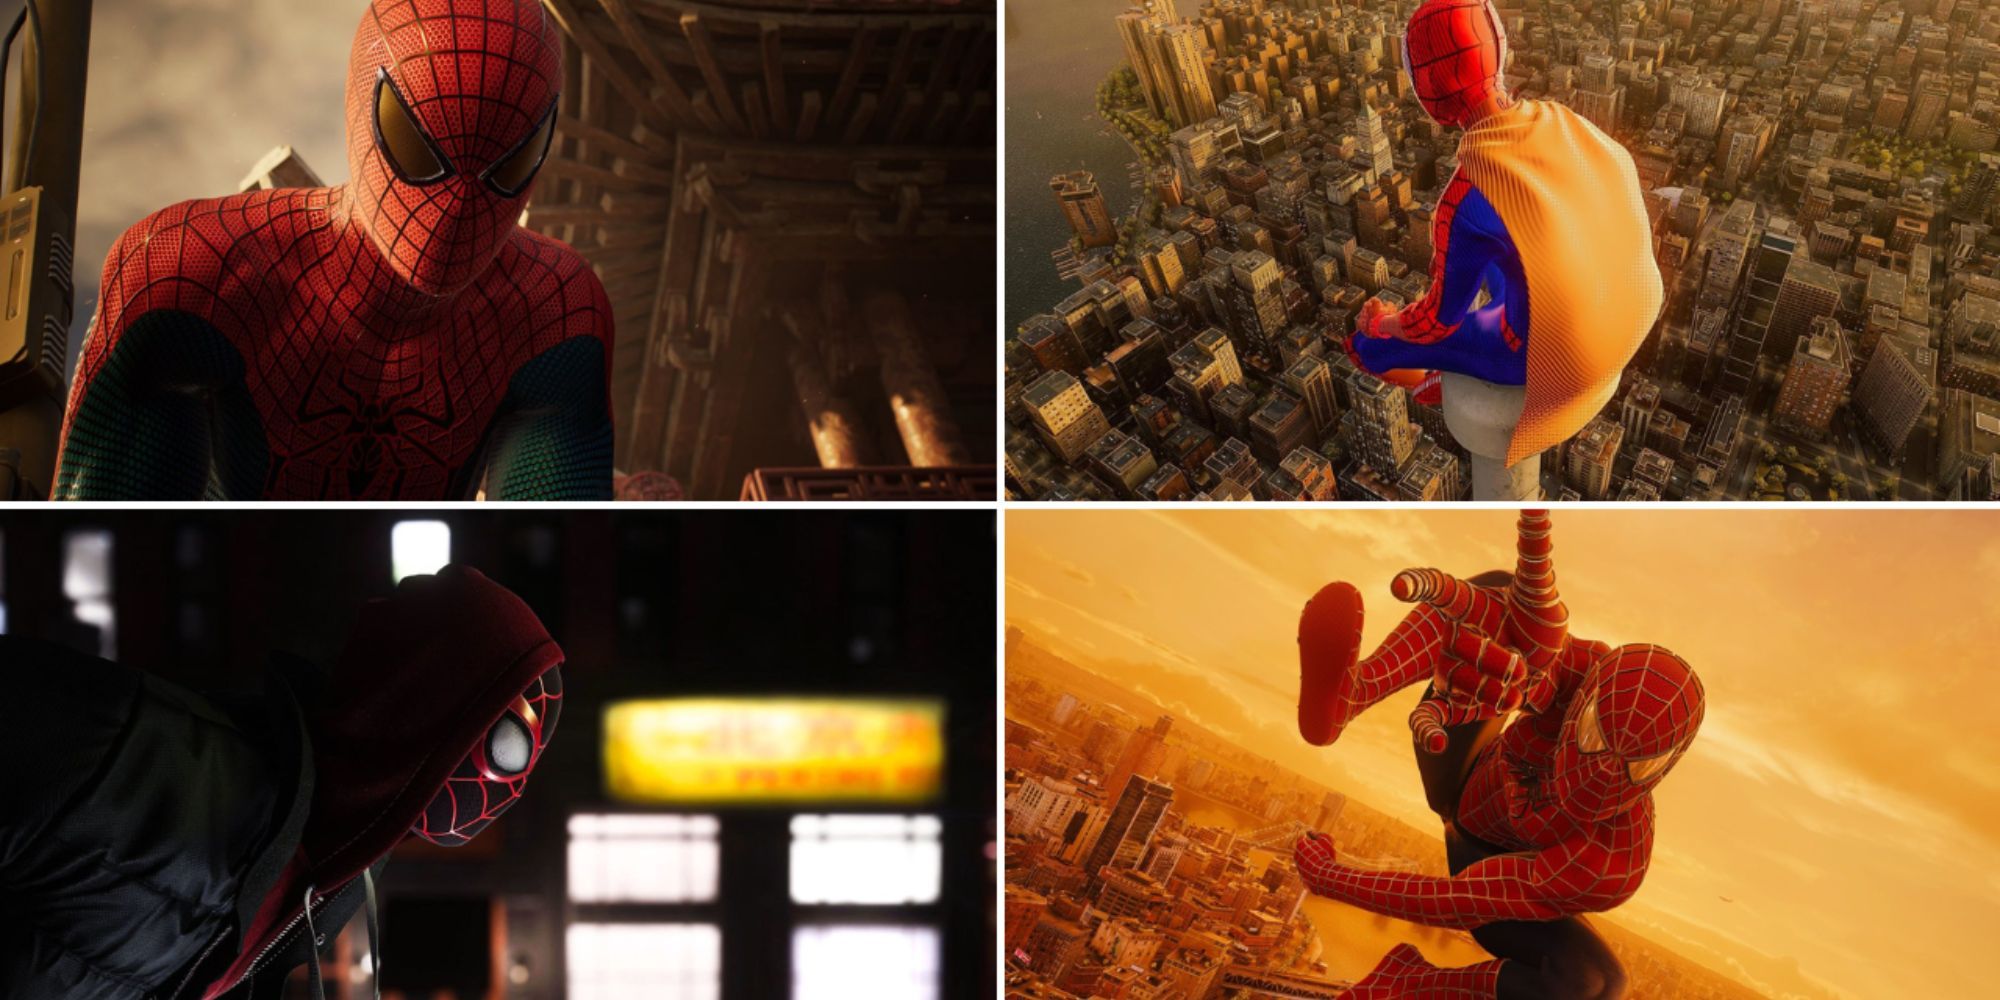 Split image of Spider-Man looking down in Chinatown, Miles Morales dressed in a homemade suit sitting overlooking the city, Miles wearing his black suit next to a takeaway sign and Spider-Man swinging in mid air with a yellow hue in Spider-Man 2